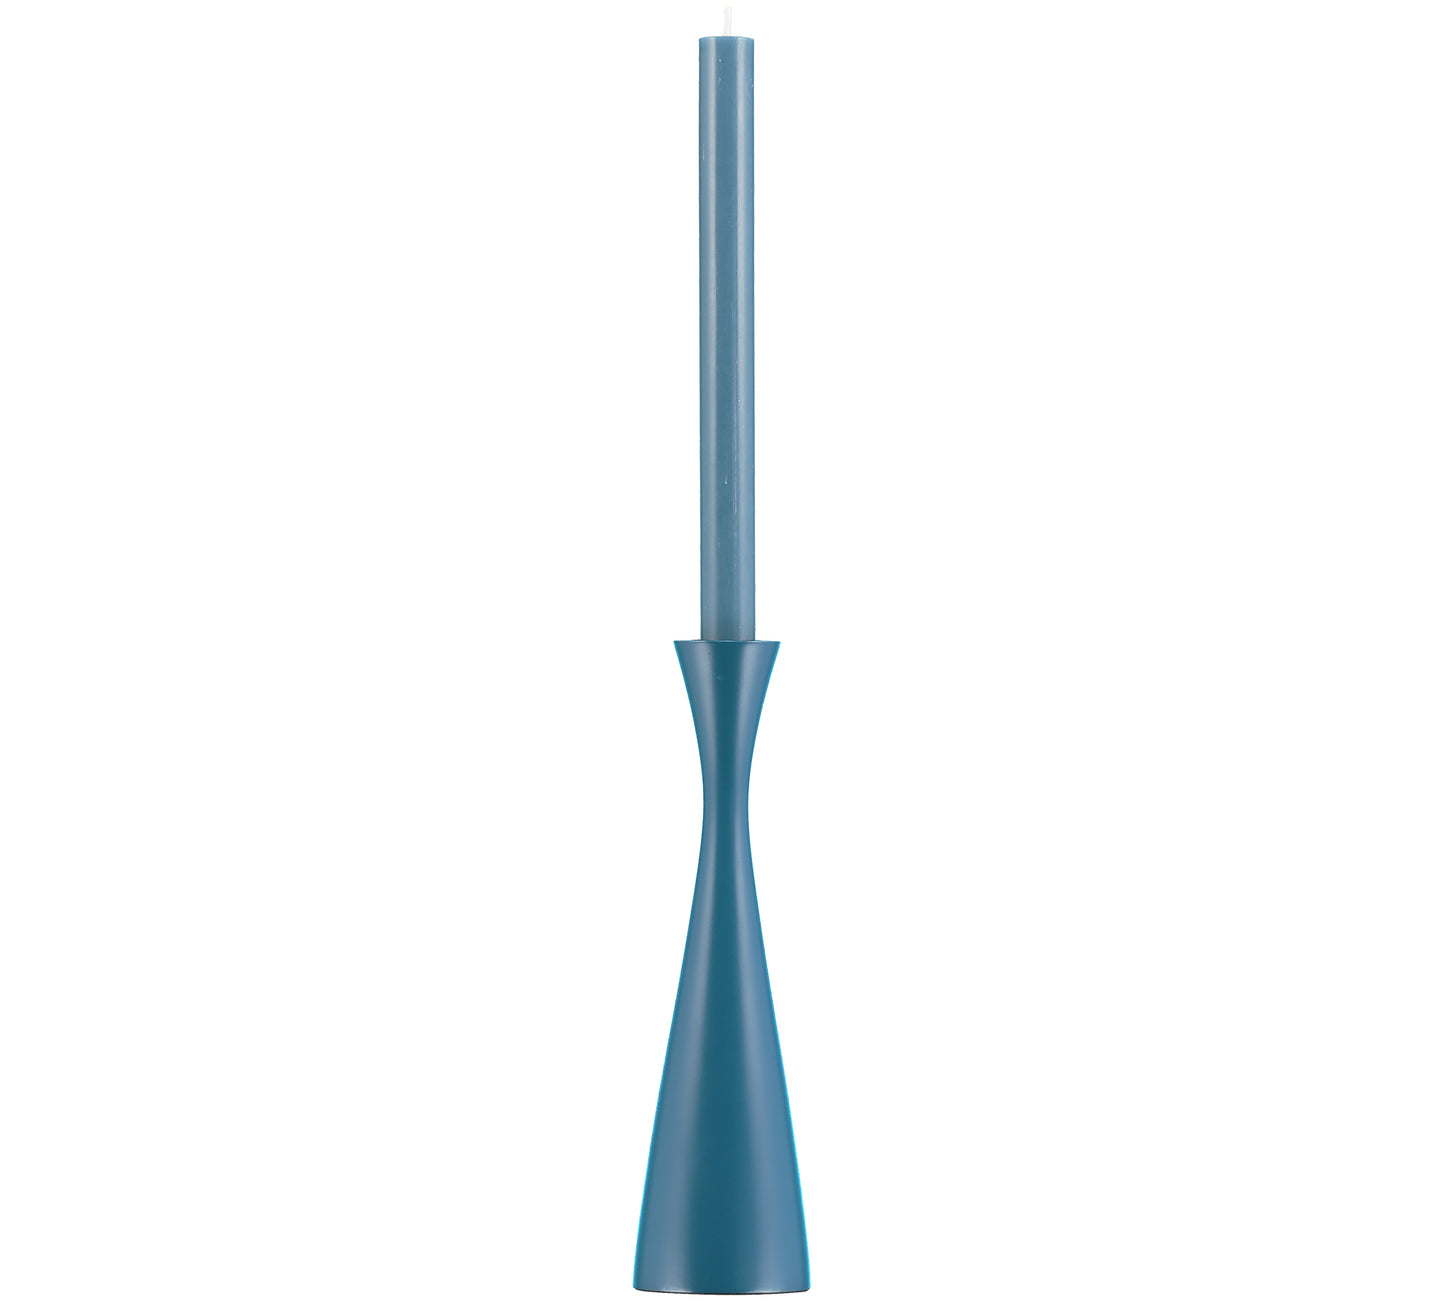 Tall Wooden Candleholder in Petrol Blue